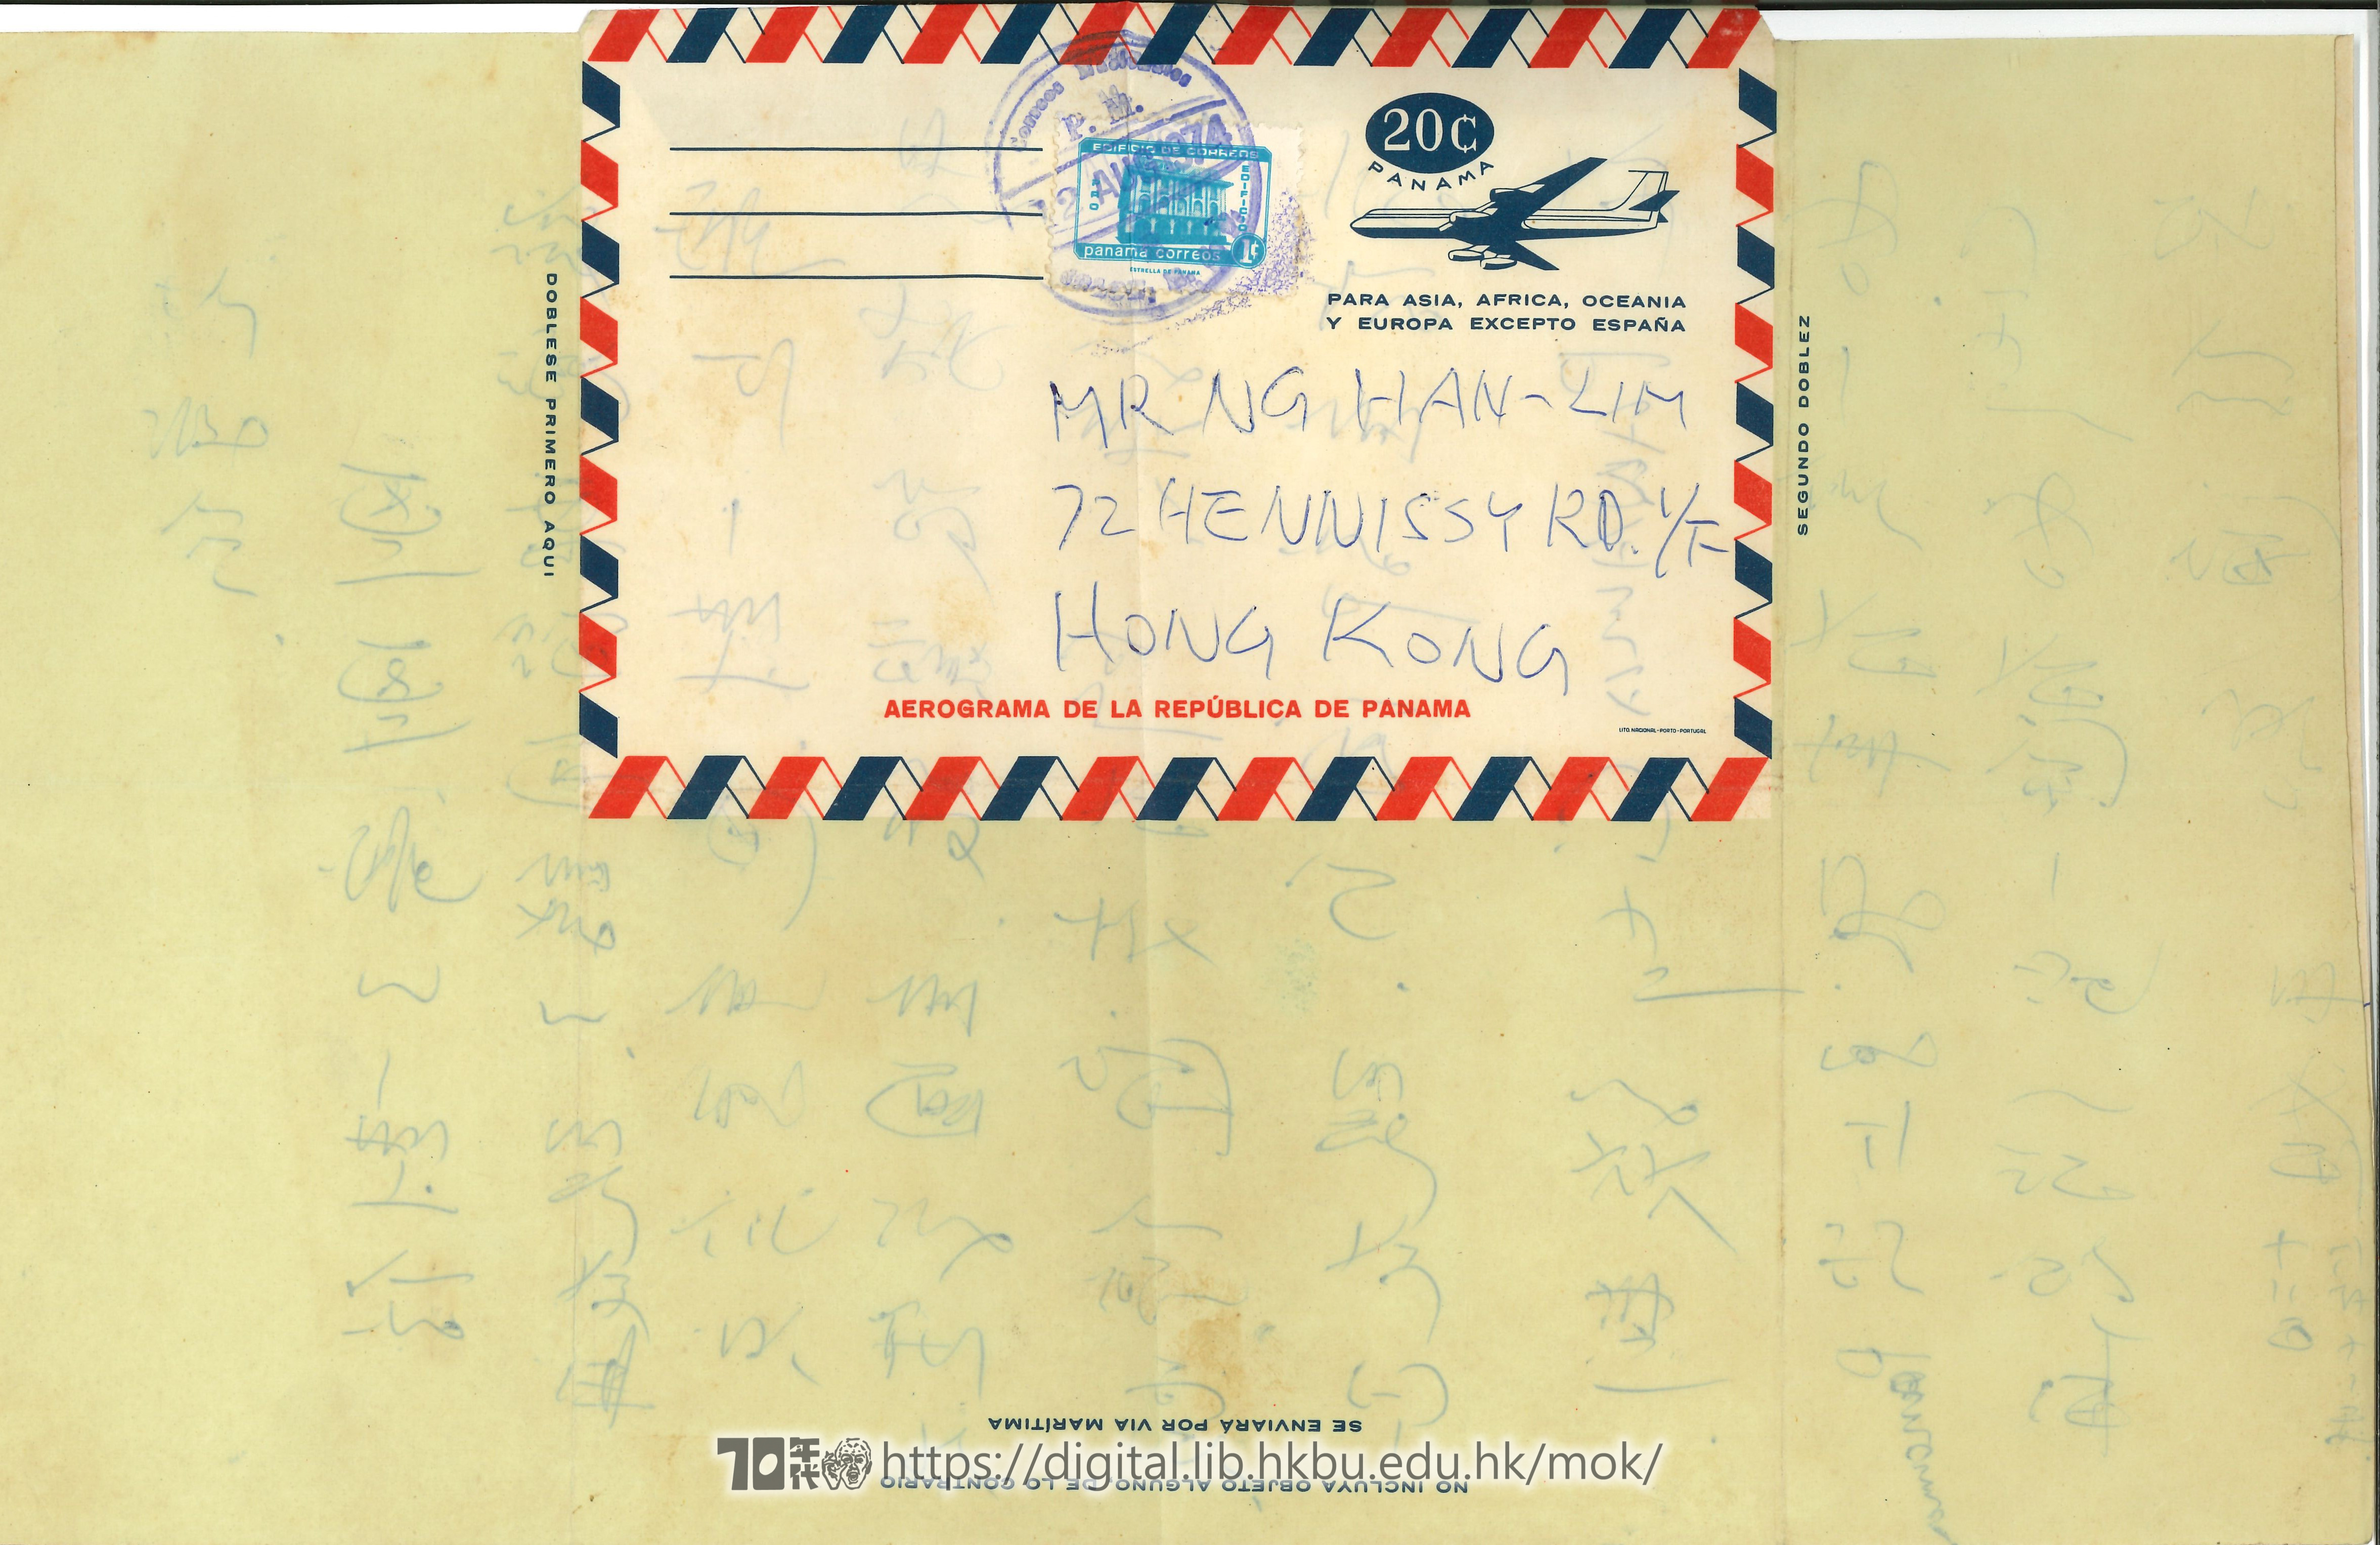   Letter from Ping Je to Ng Han Lim  